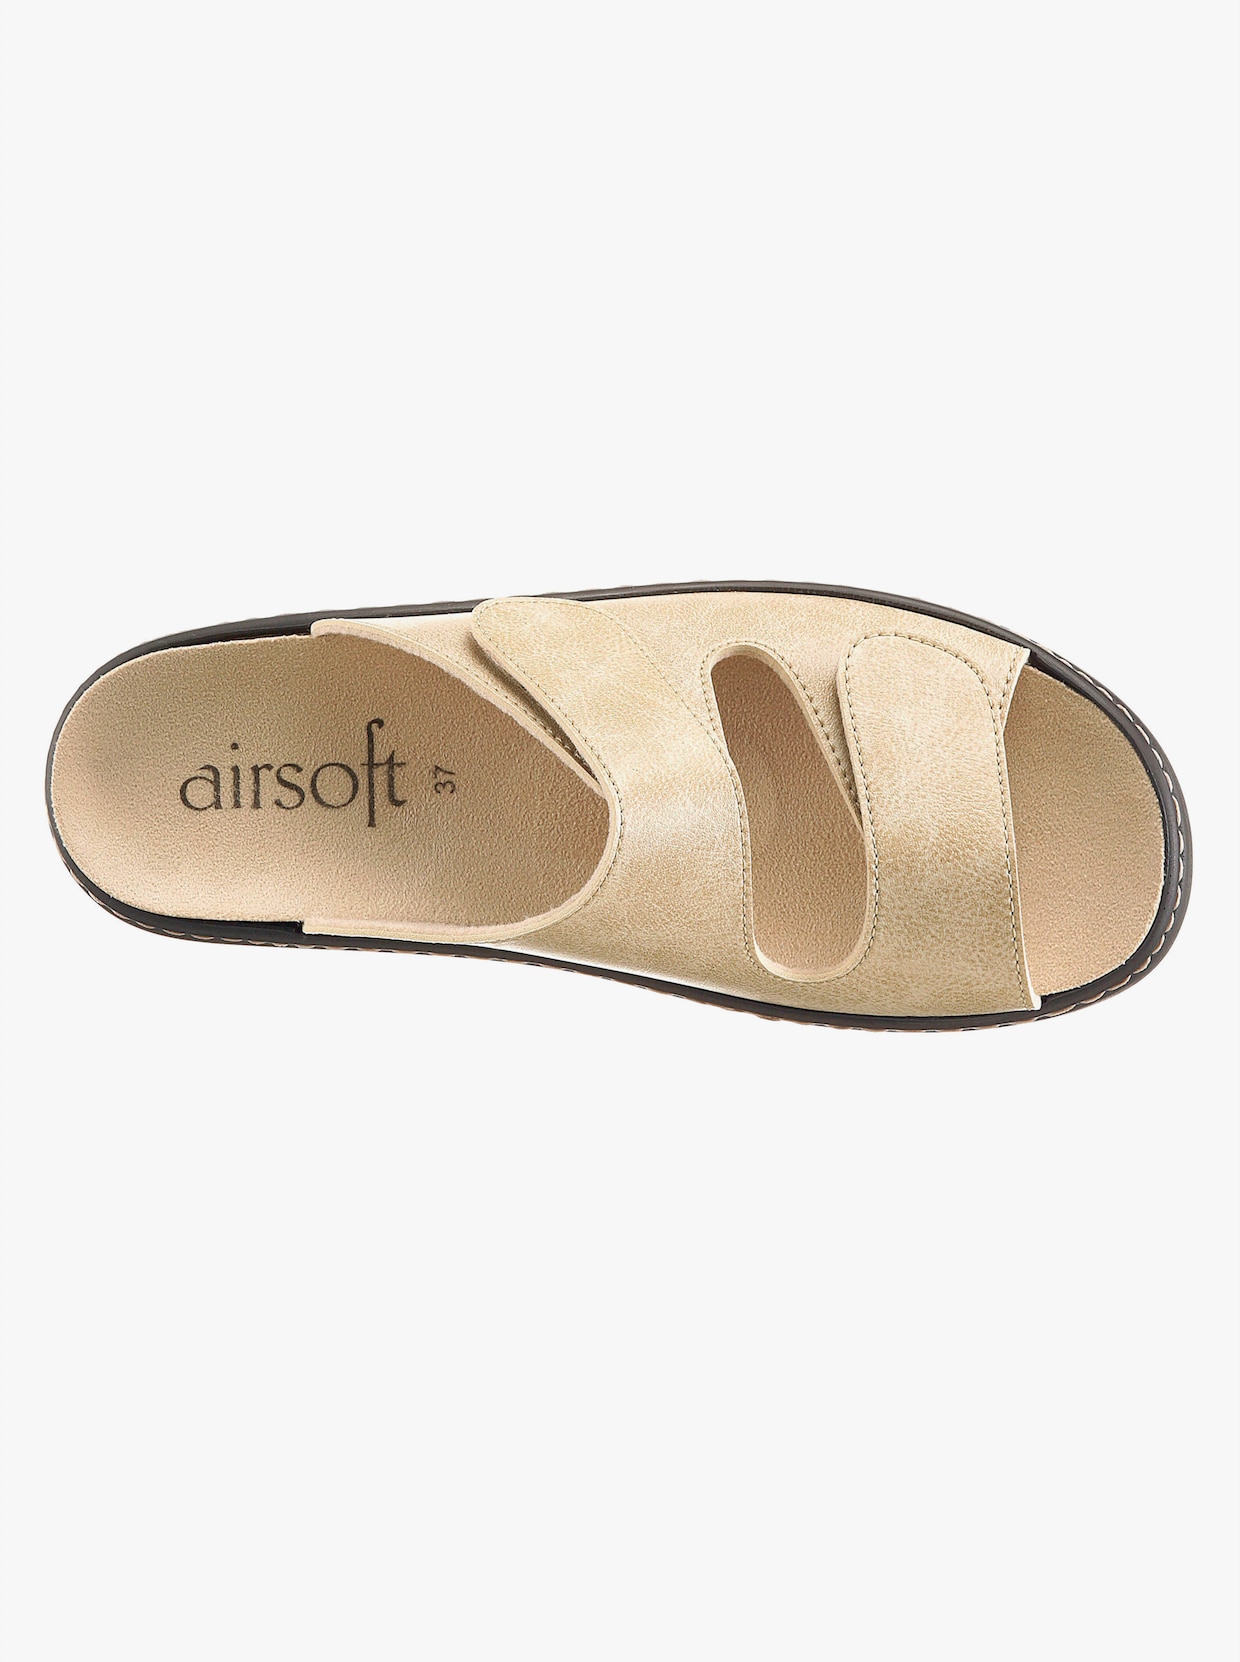 airsoft comfort+ slippers - beige